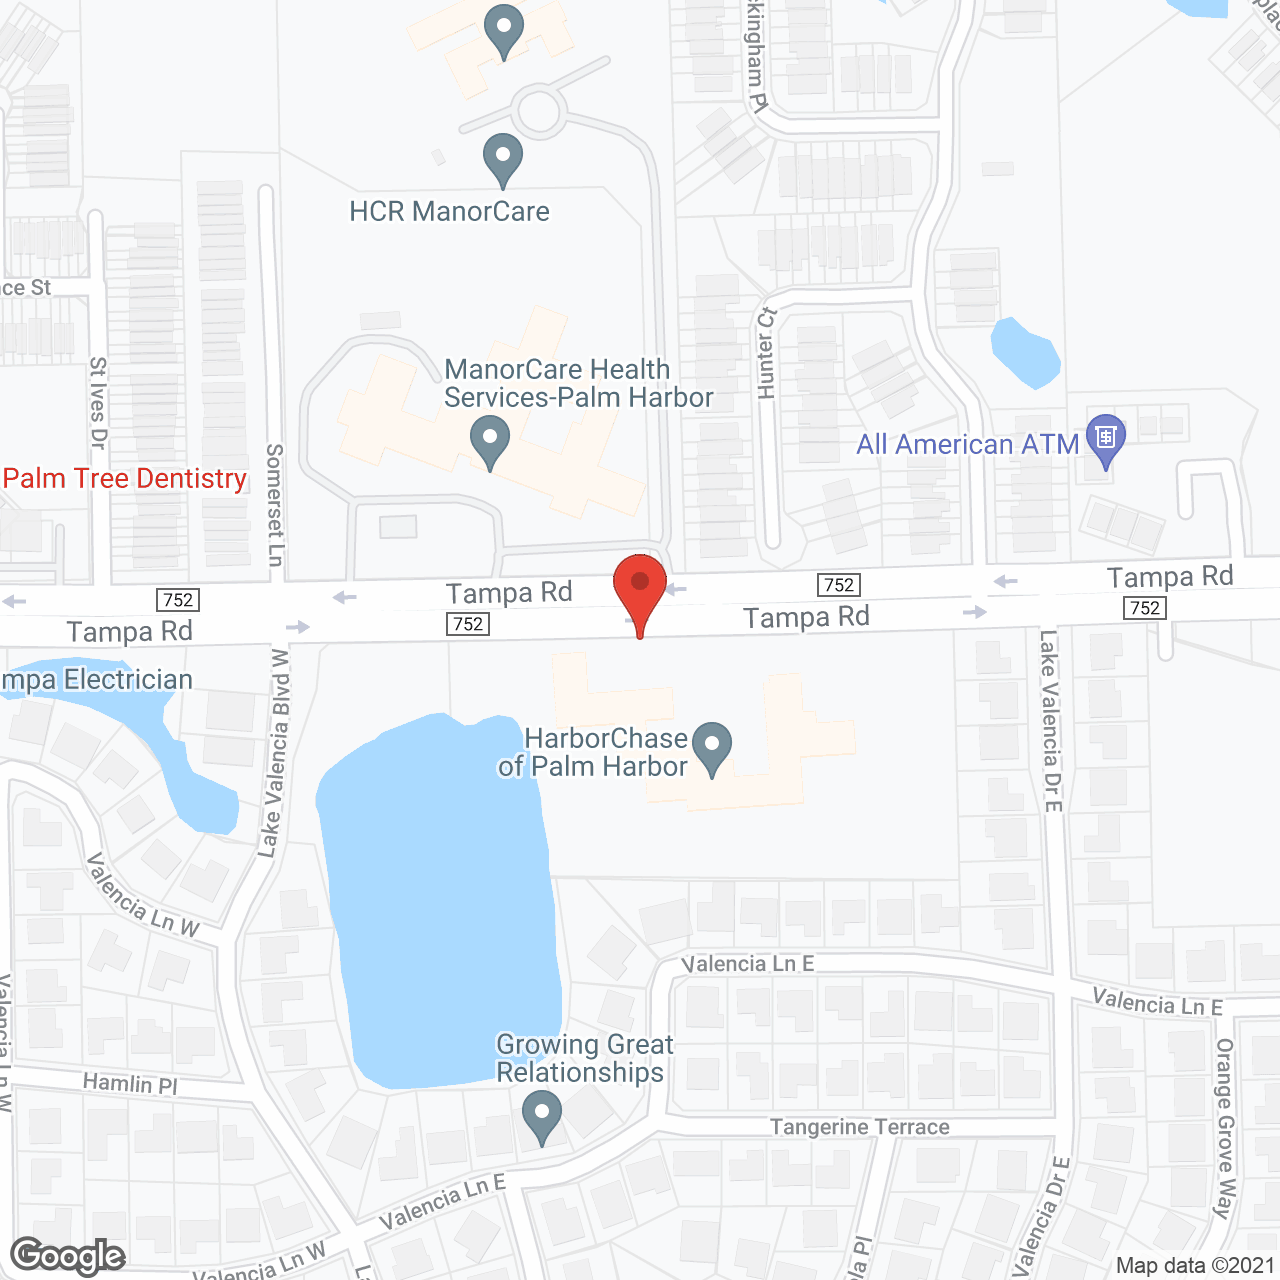 HarborChase of Palm Harbor in google map